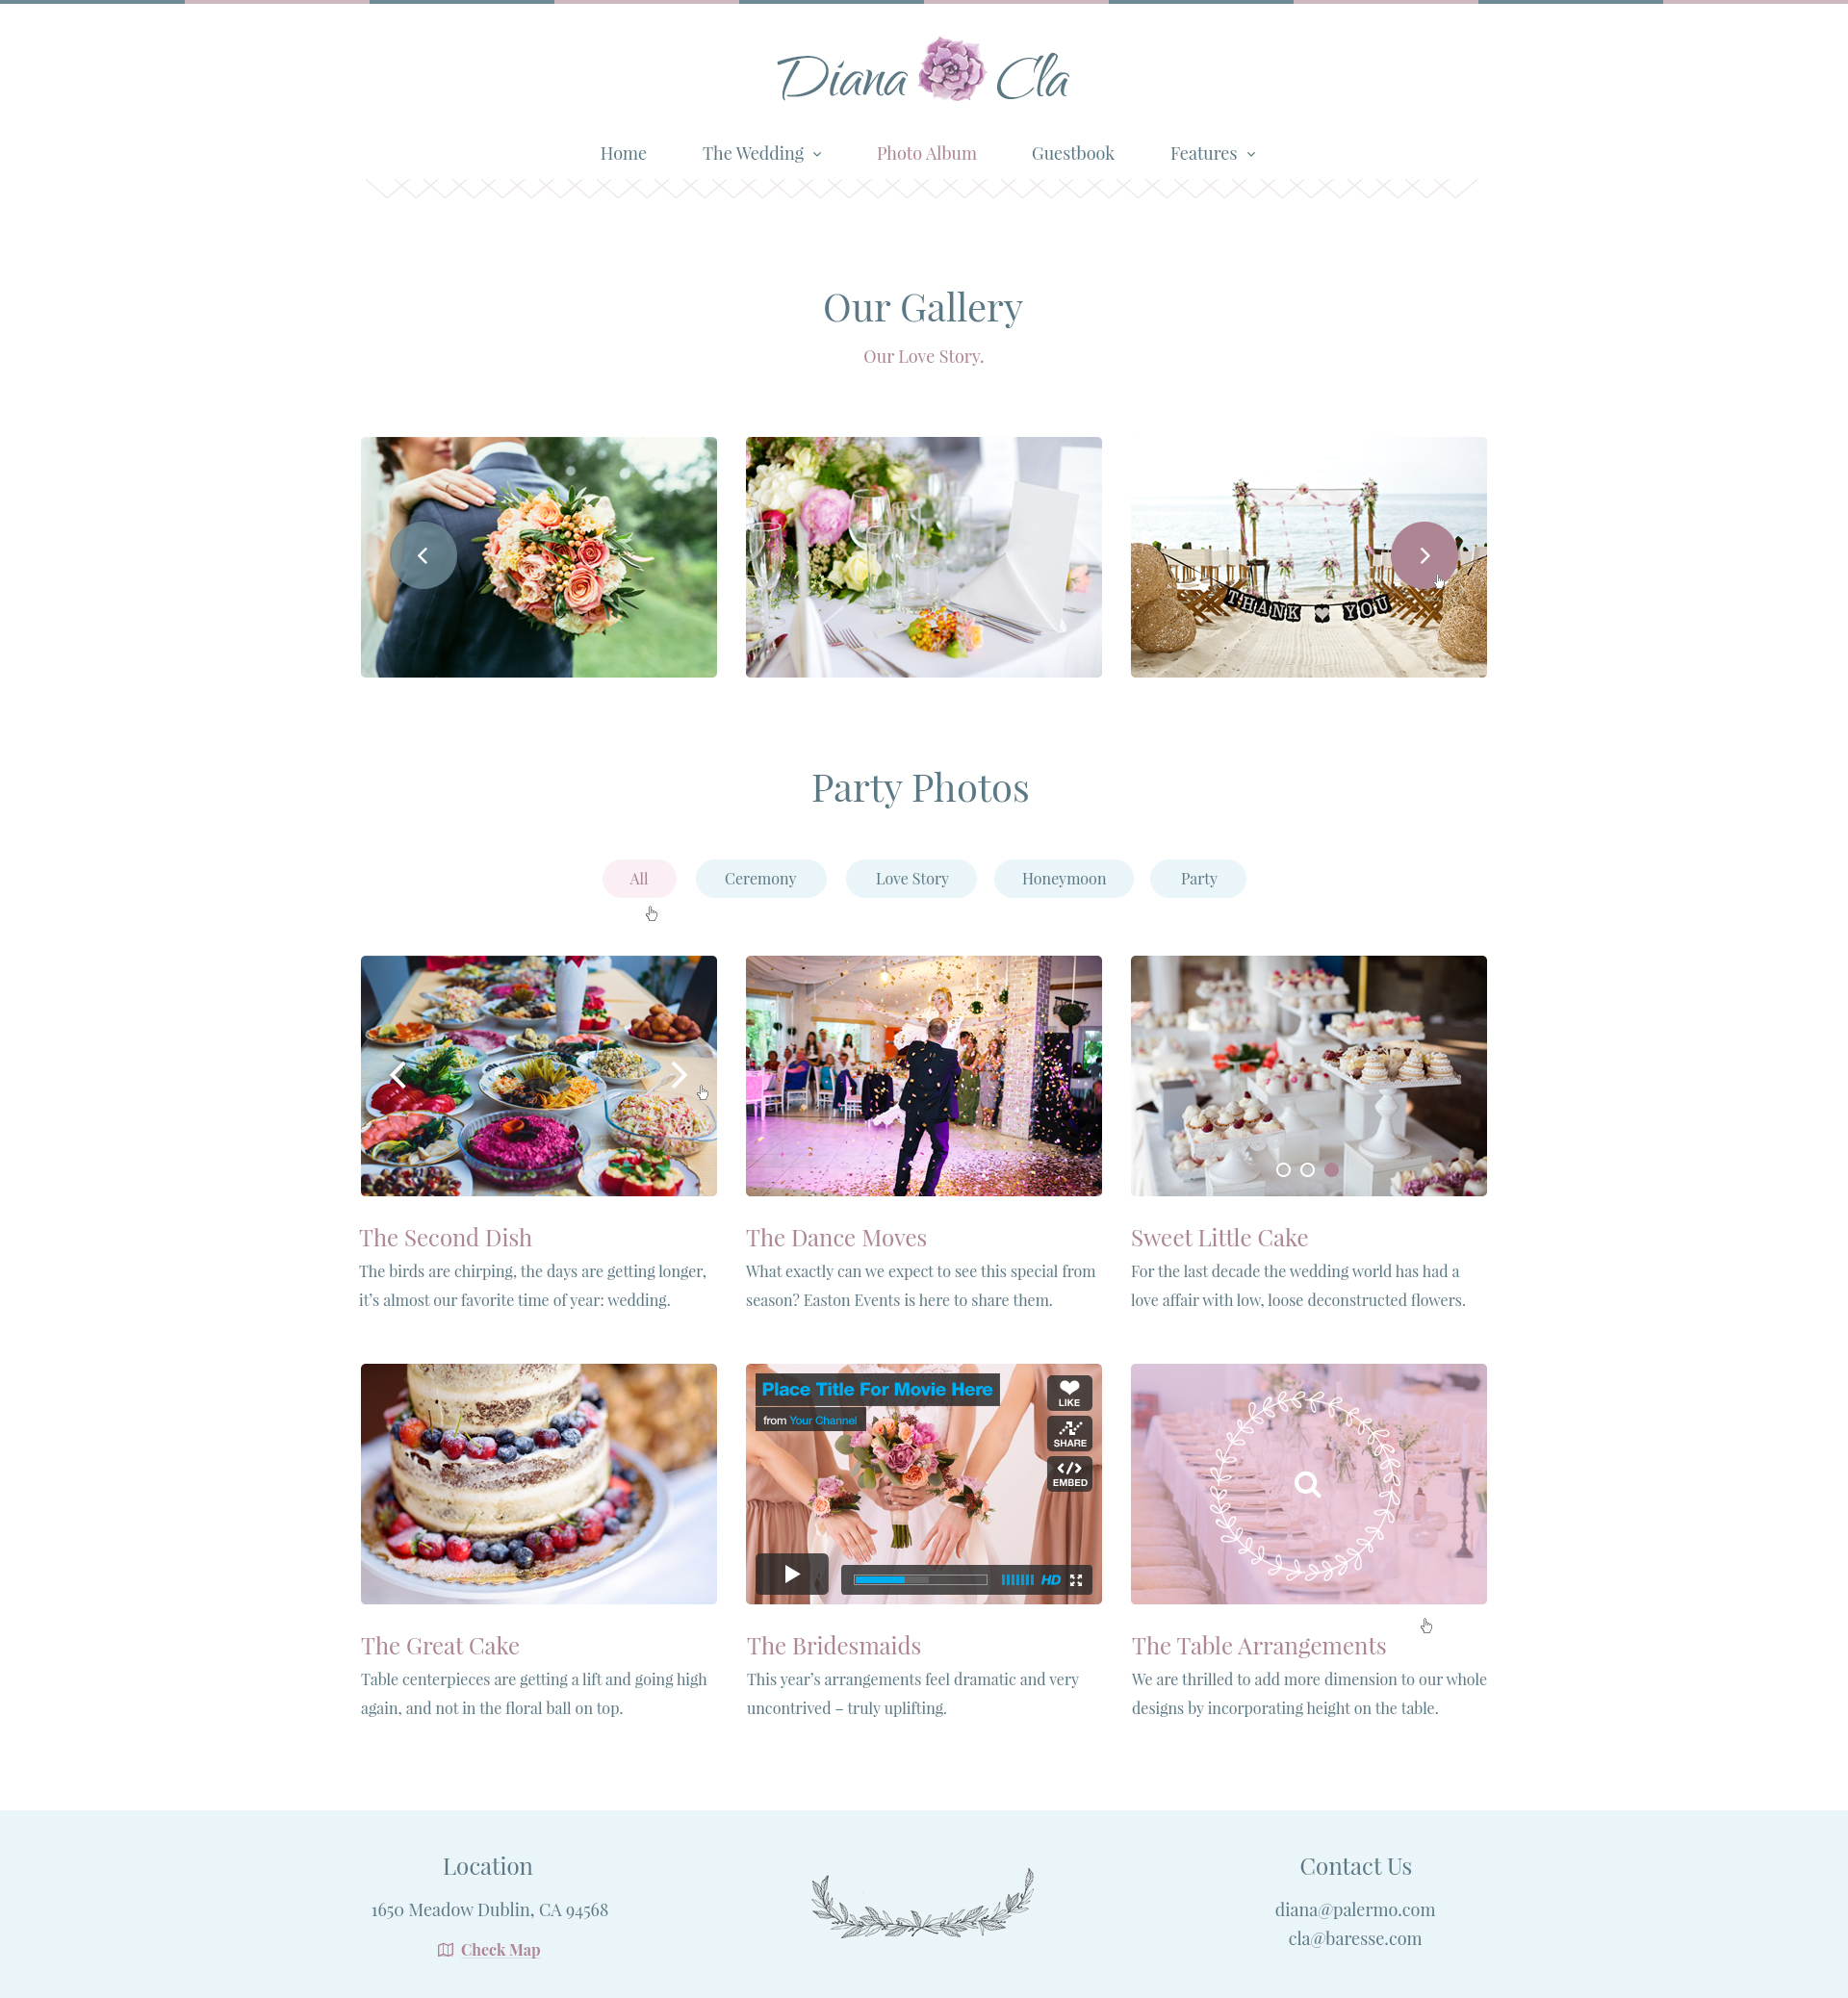 Special Day - Wedding & Ceremony PSD Template